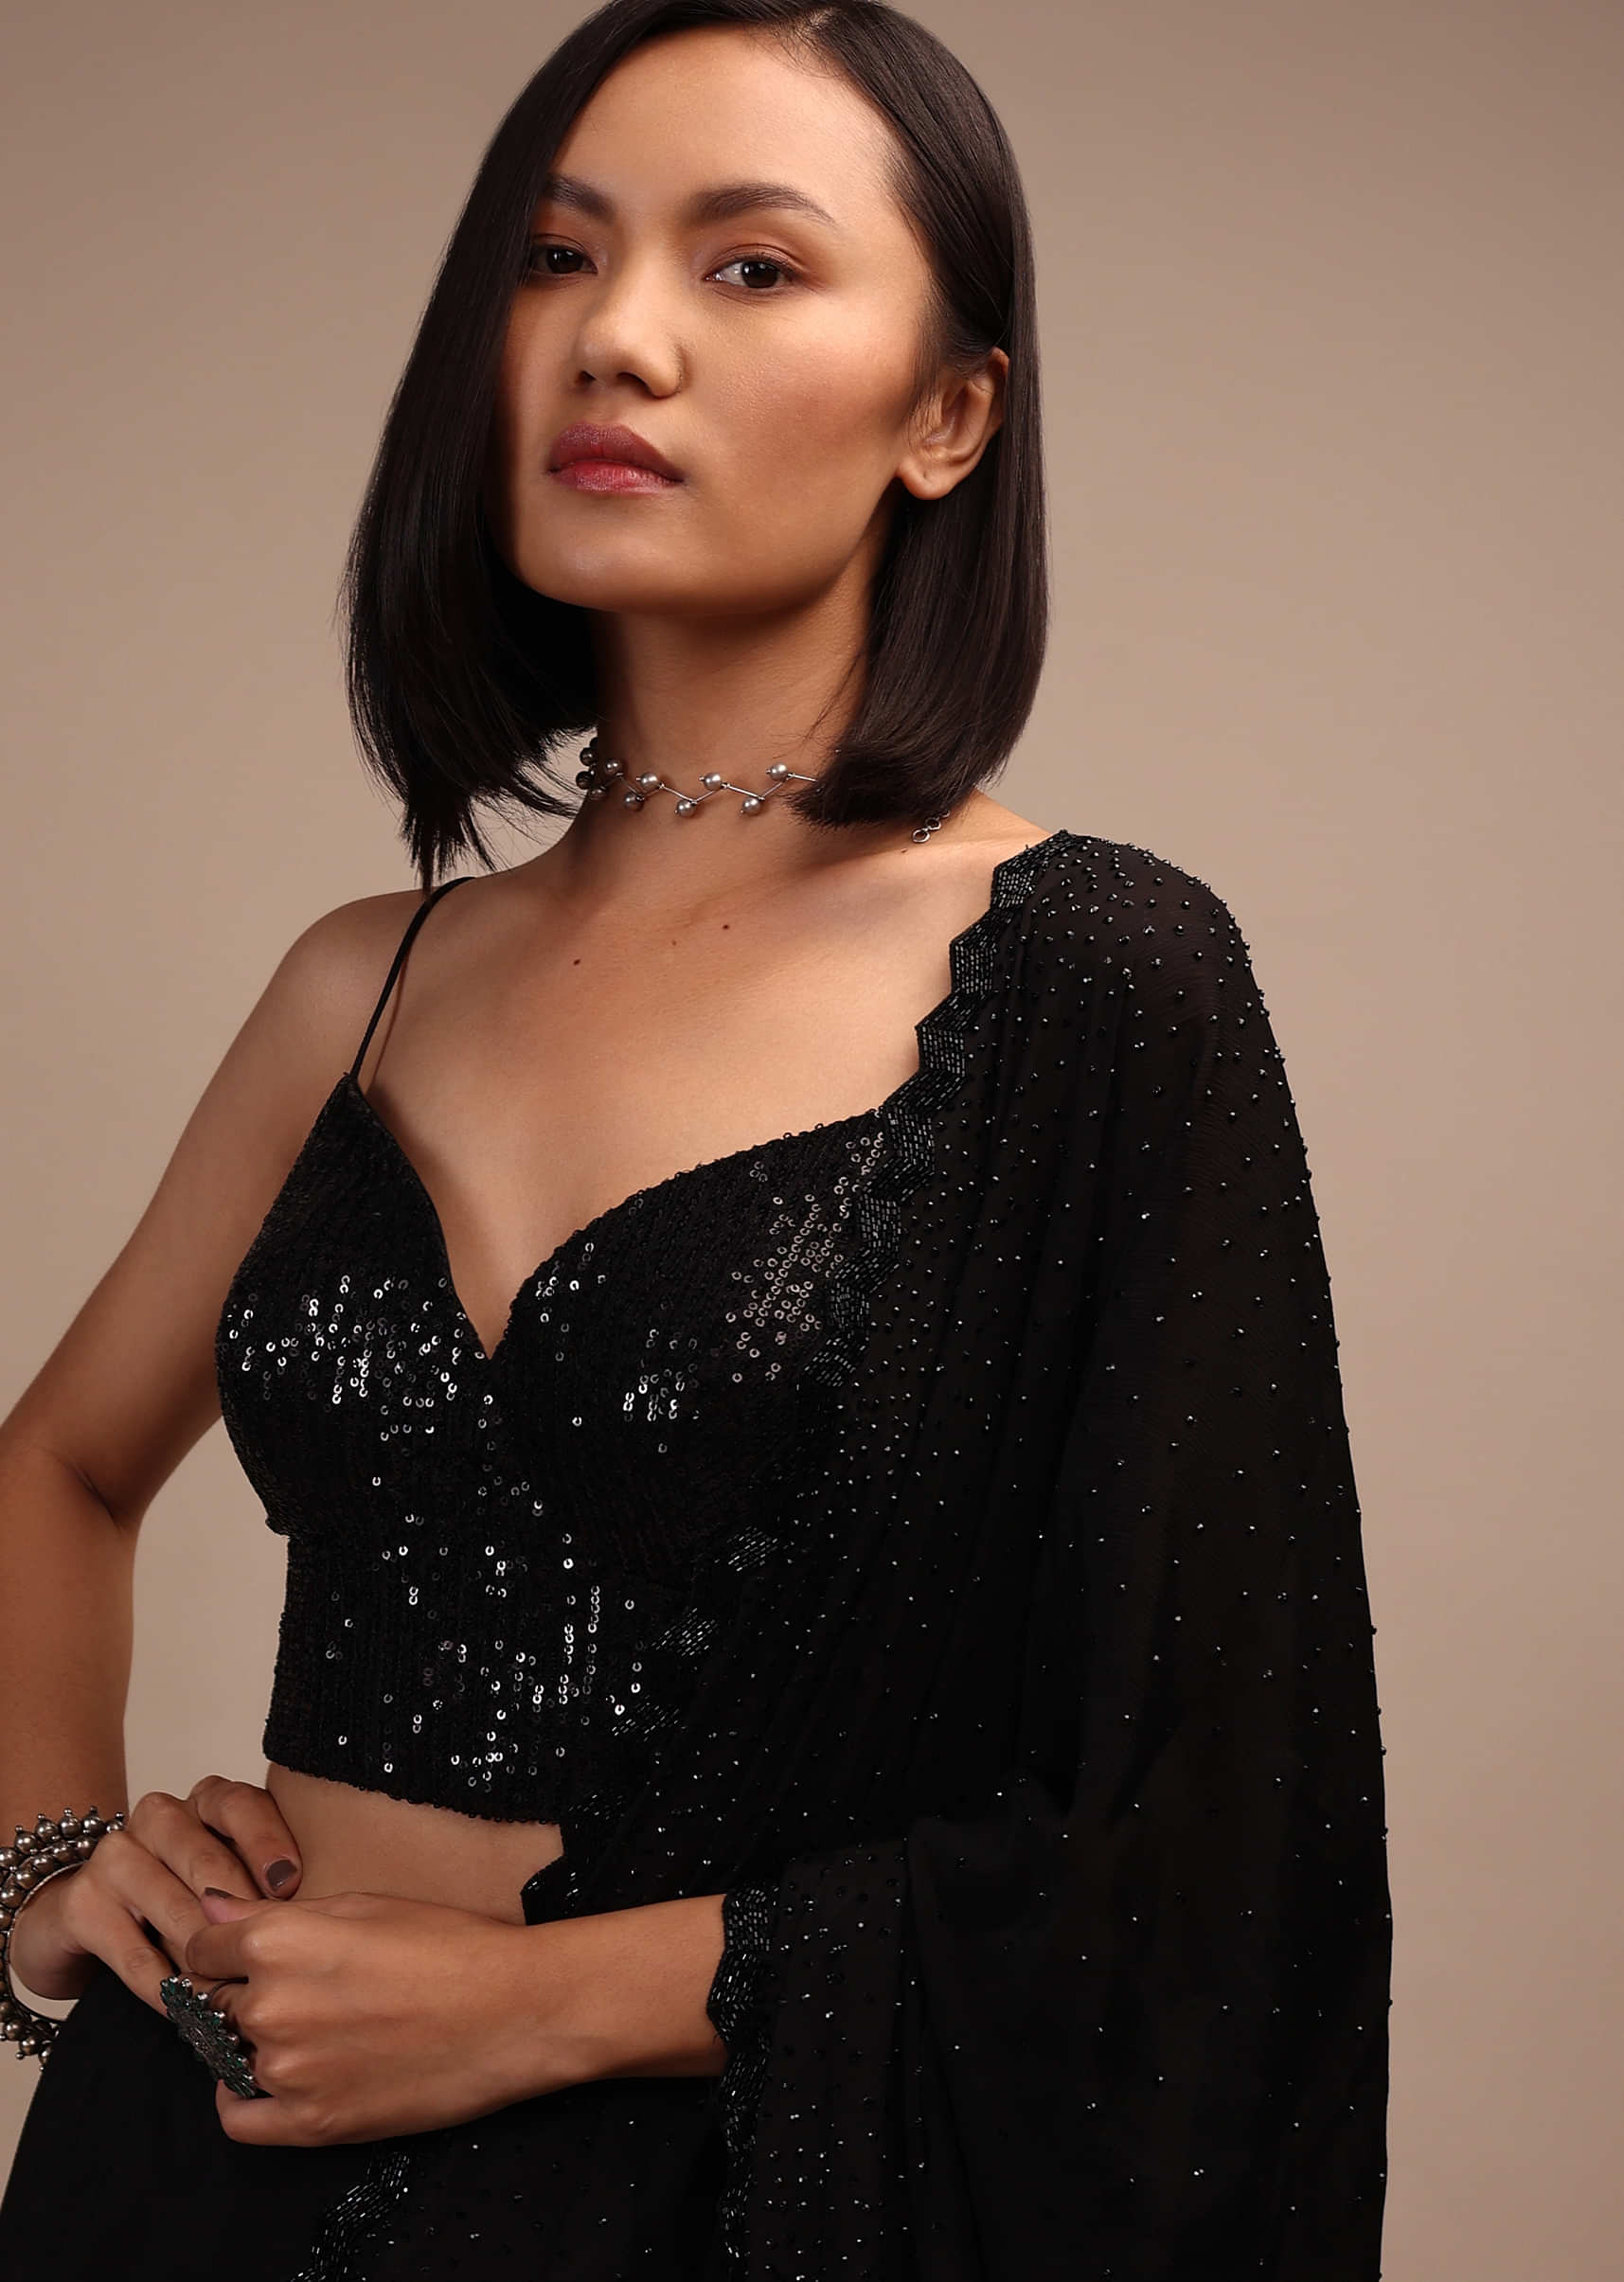 Black Sequin Spaghetti Strap Blouse In A Sweetheart Neckline Straight Hemline With Side Zip Closure